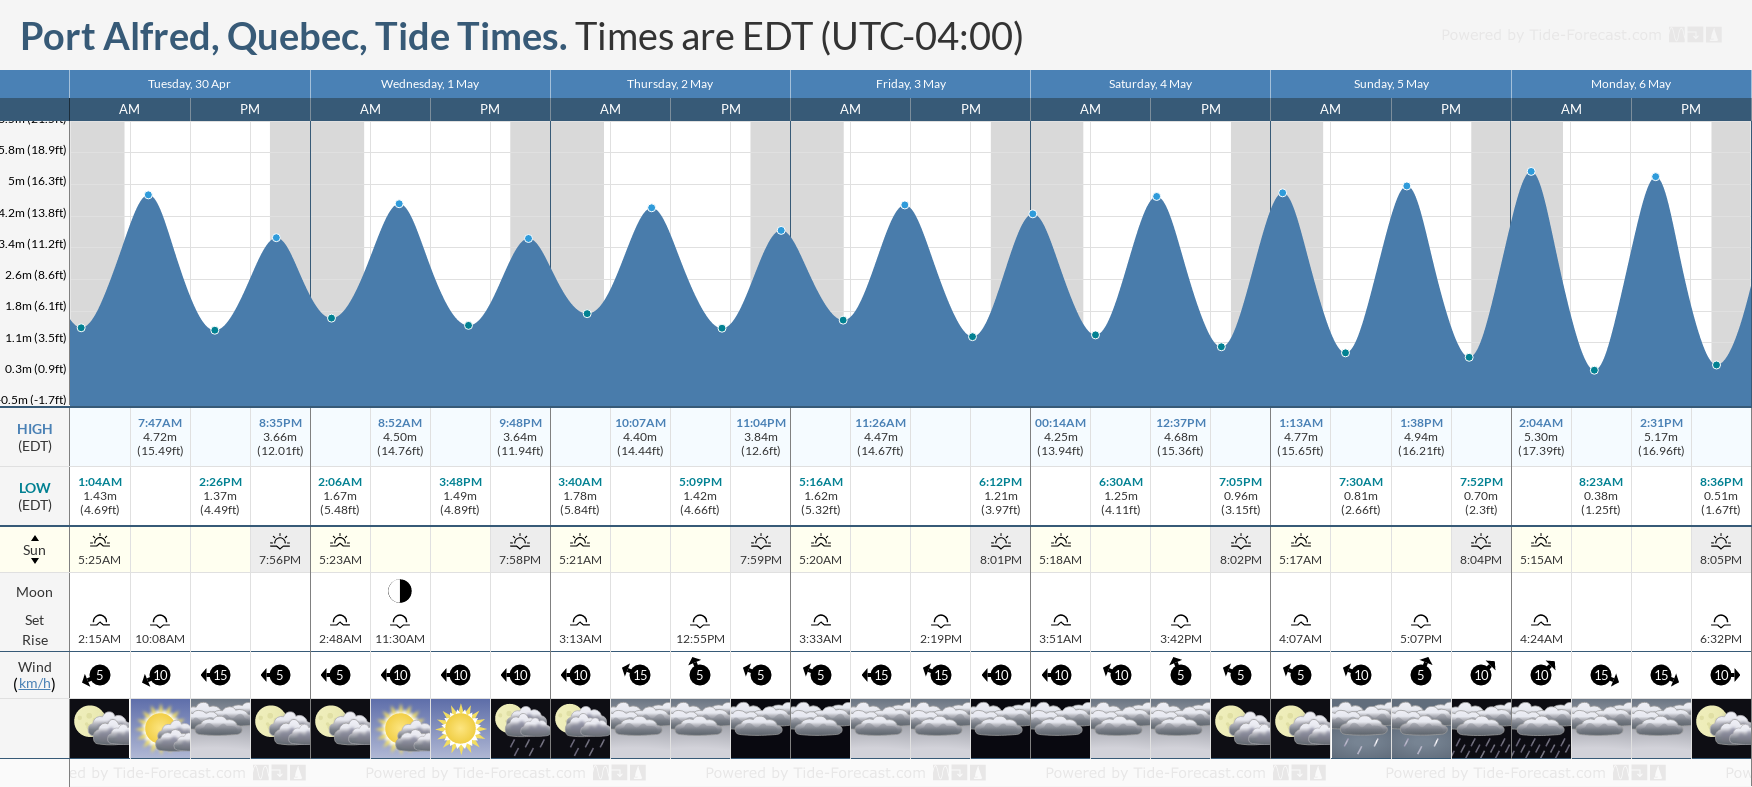 Port Alfred, Quebec Tide Chart including high and low tide tide times for the next 7 days